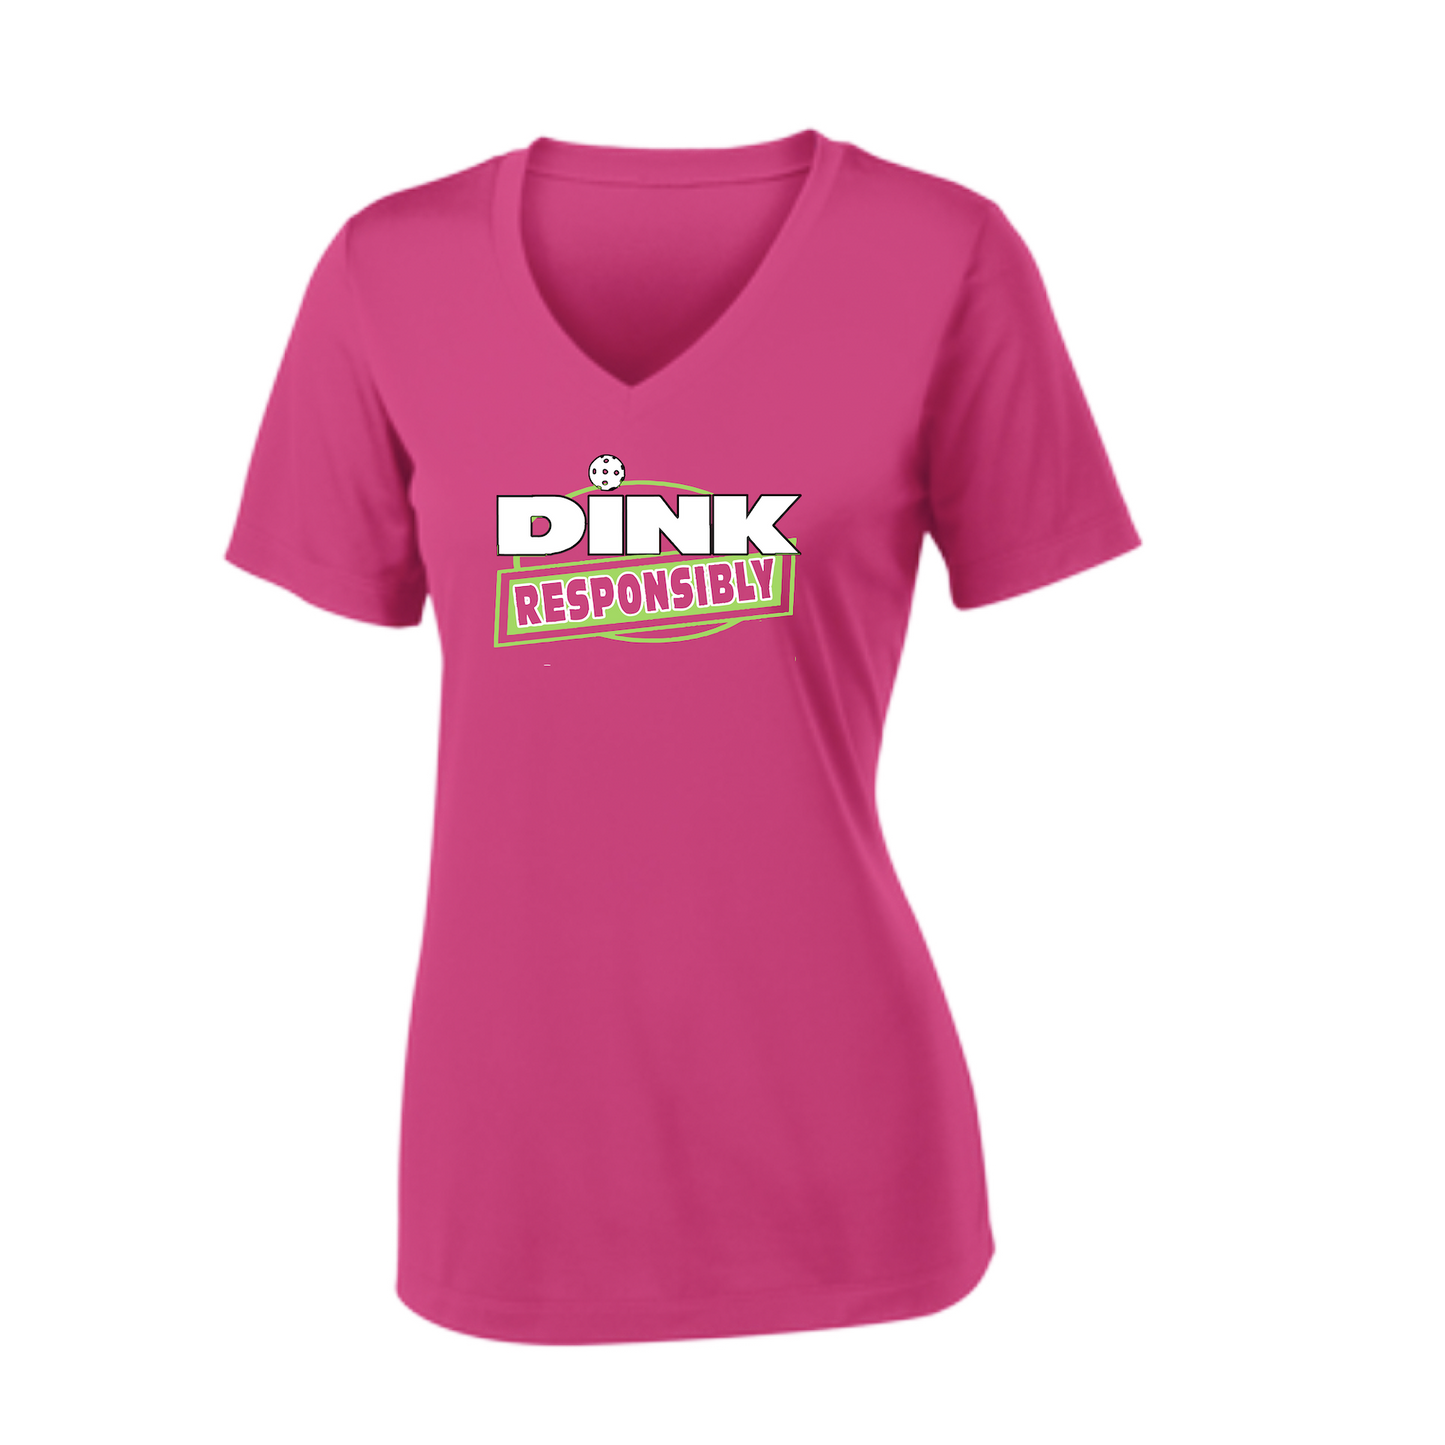 Pickleball Design: Dink Responsibly  Women's Style:  Short Sleeve V-Neck  Turn up the volume in this Women's shirt with its perfect mix of softness and attitude. Material is ultra-comfortable with moisture wicking properties and tri-blend softness. PosiCharge technology locks in color. Highly breathable and lightweight.